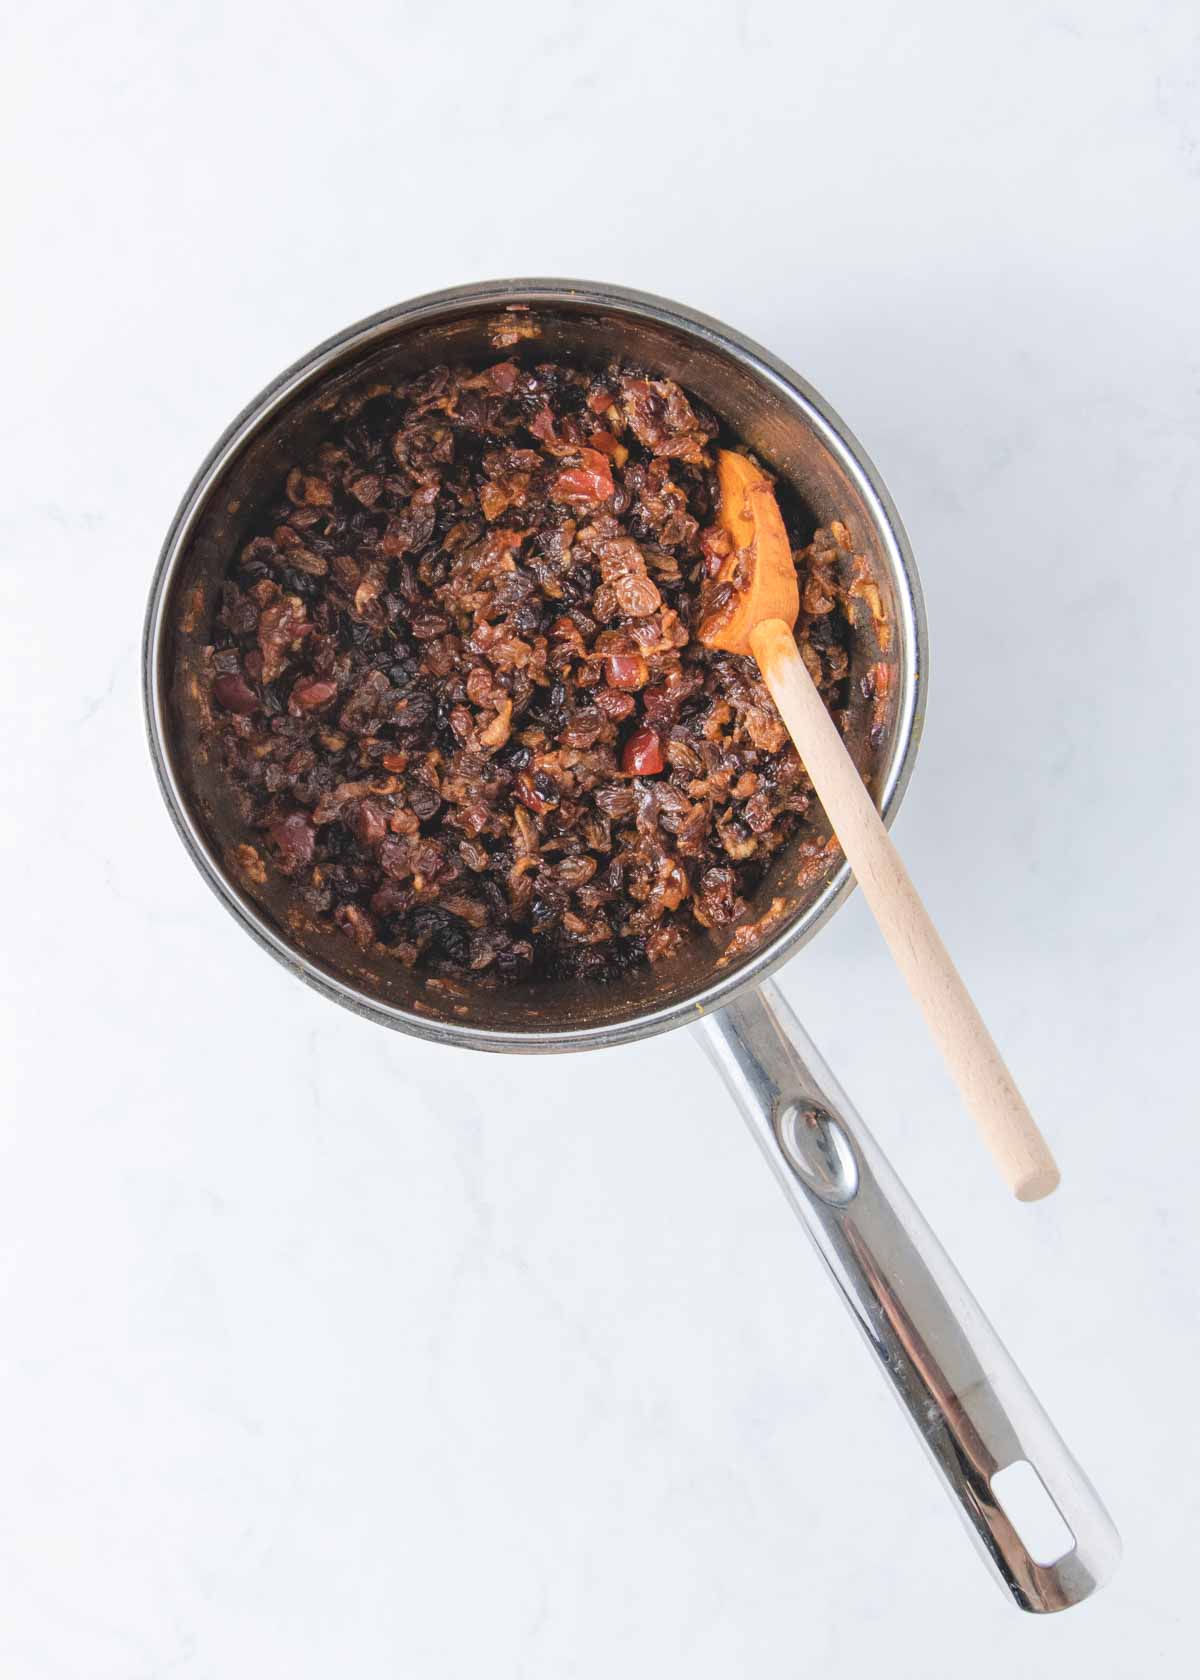 The cooked fruit mince in a pan with a wooden spoon.